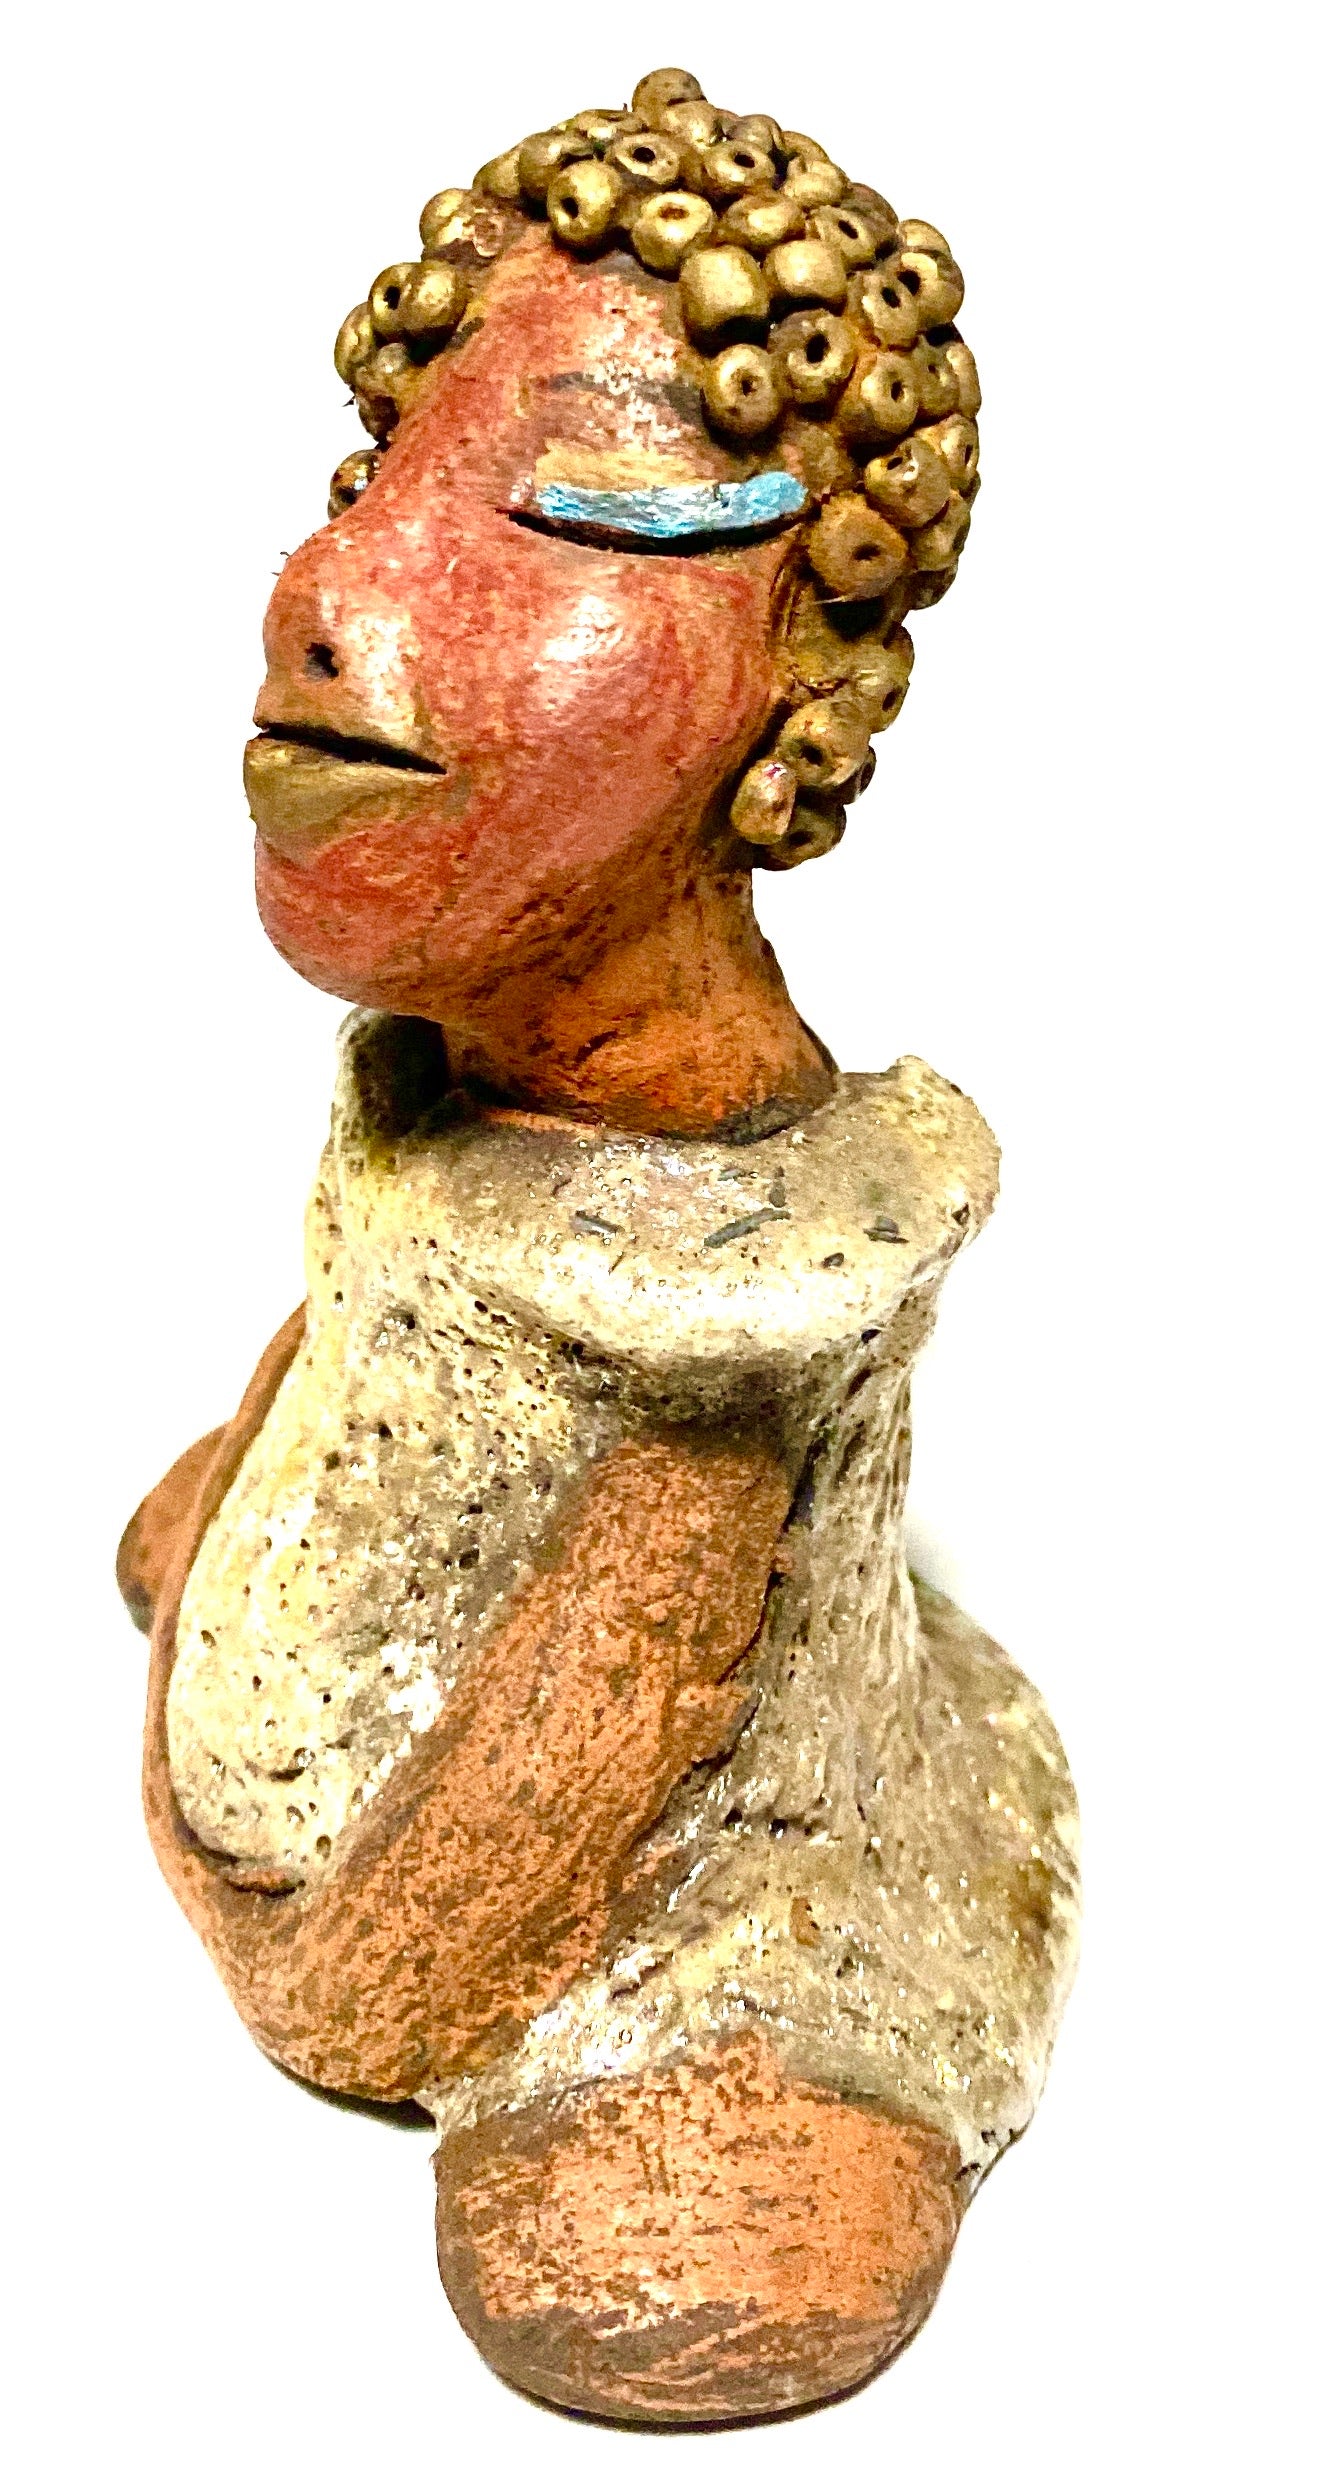 Meet Little Marissa! Marissa stands 4.5" x 4" x 2.5" and weighs 6.7 ozs.  Marissa has a lovely glossy gold dress.  She gold beaded hair. Marissa  appears to sit in a yoga pose. Her long arms rest at her side. Marissa is a great starter piece from the Herdew Collection!